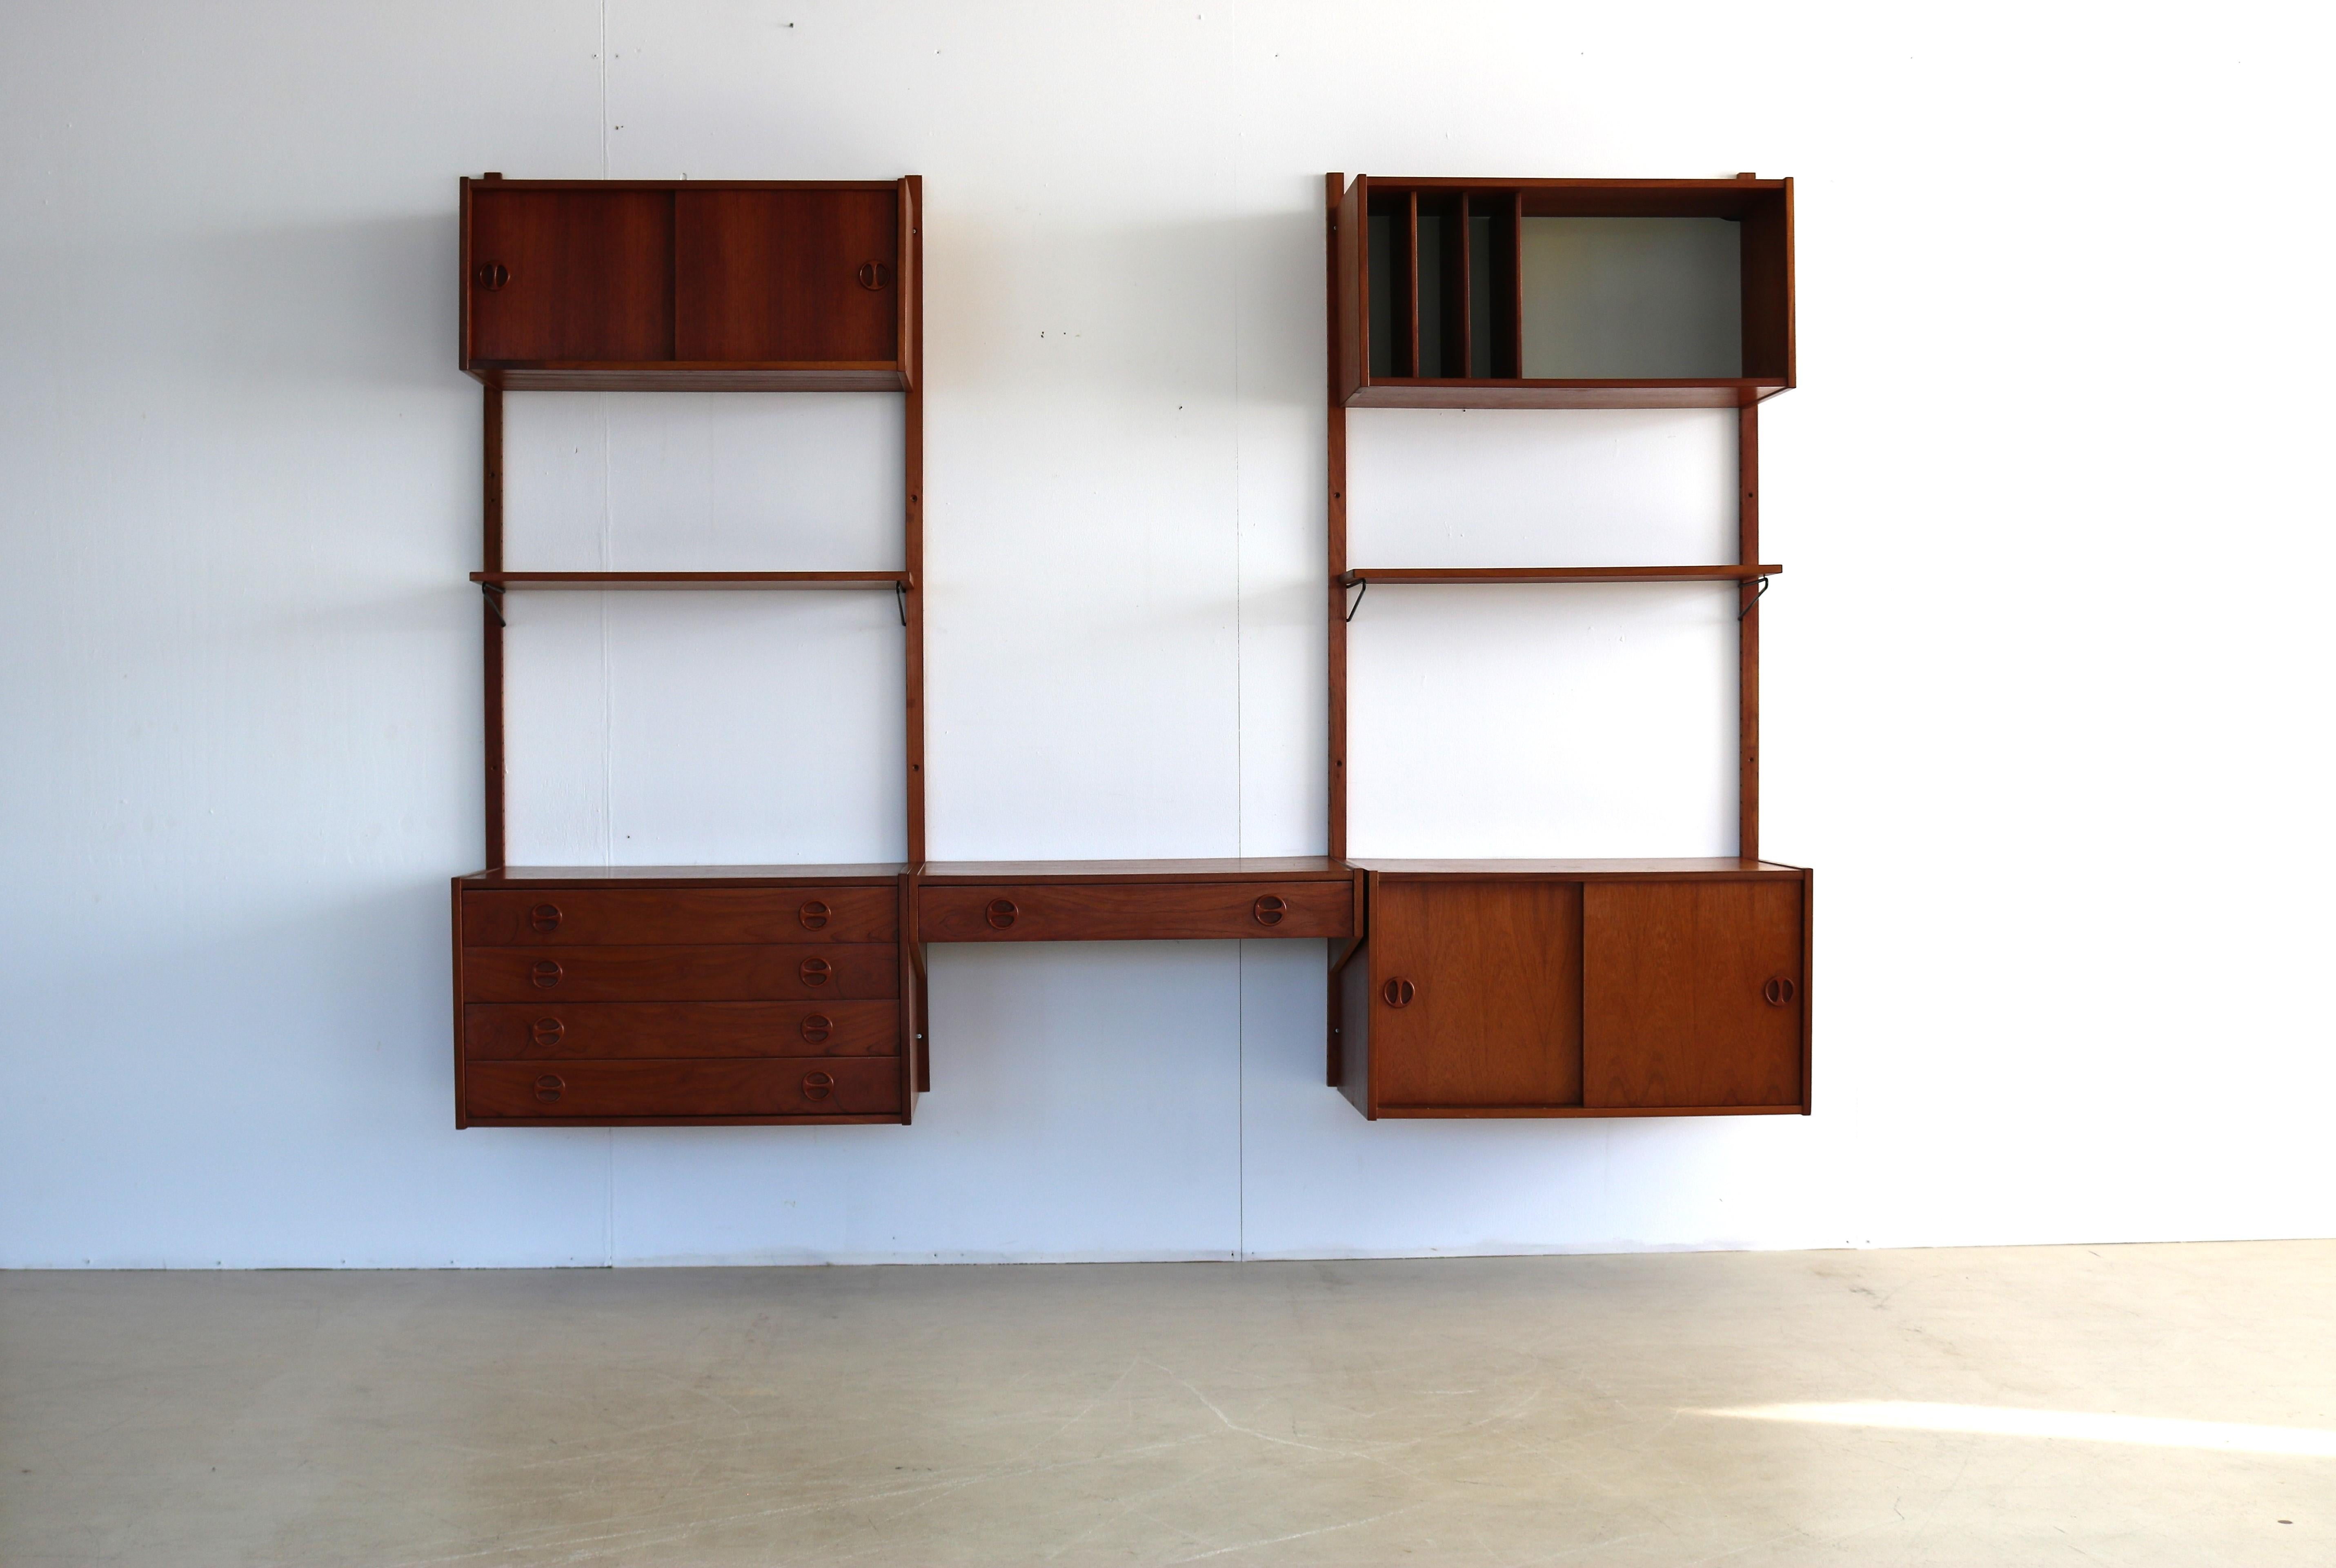 vintage wall system  wall unit  teak  60s  Danish

period  60's
designs  unknown  Denmark
conditions  good  light signs of use
size  175 x 244 x 45 (hxwxd)

details  teak; modular;

article number  1886